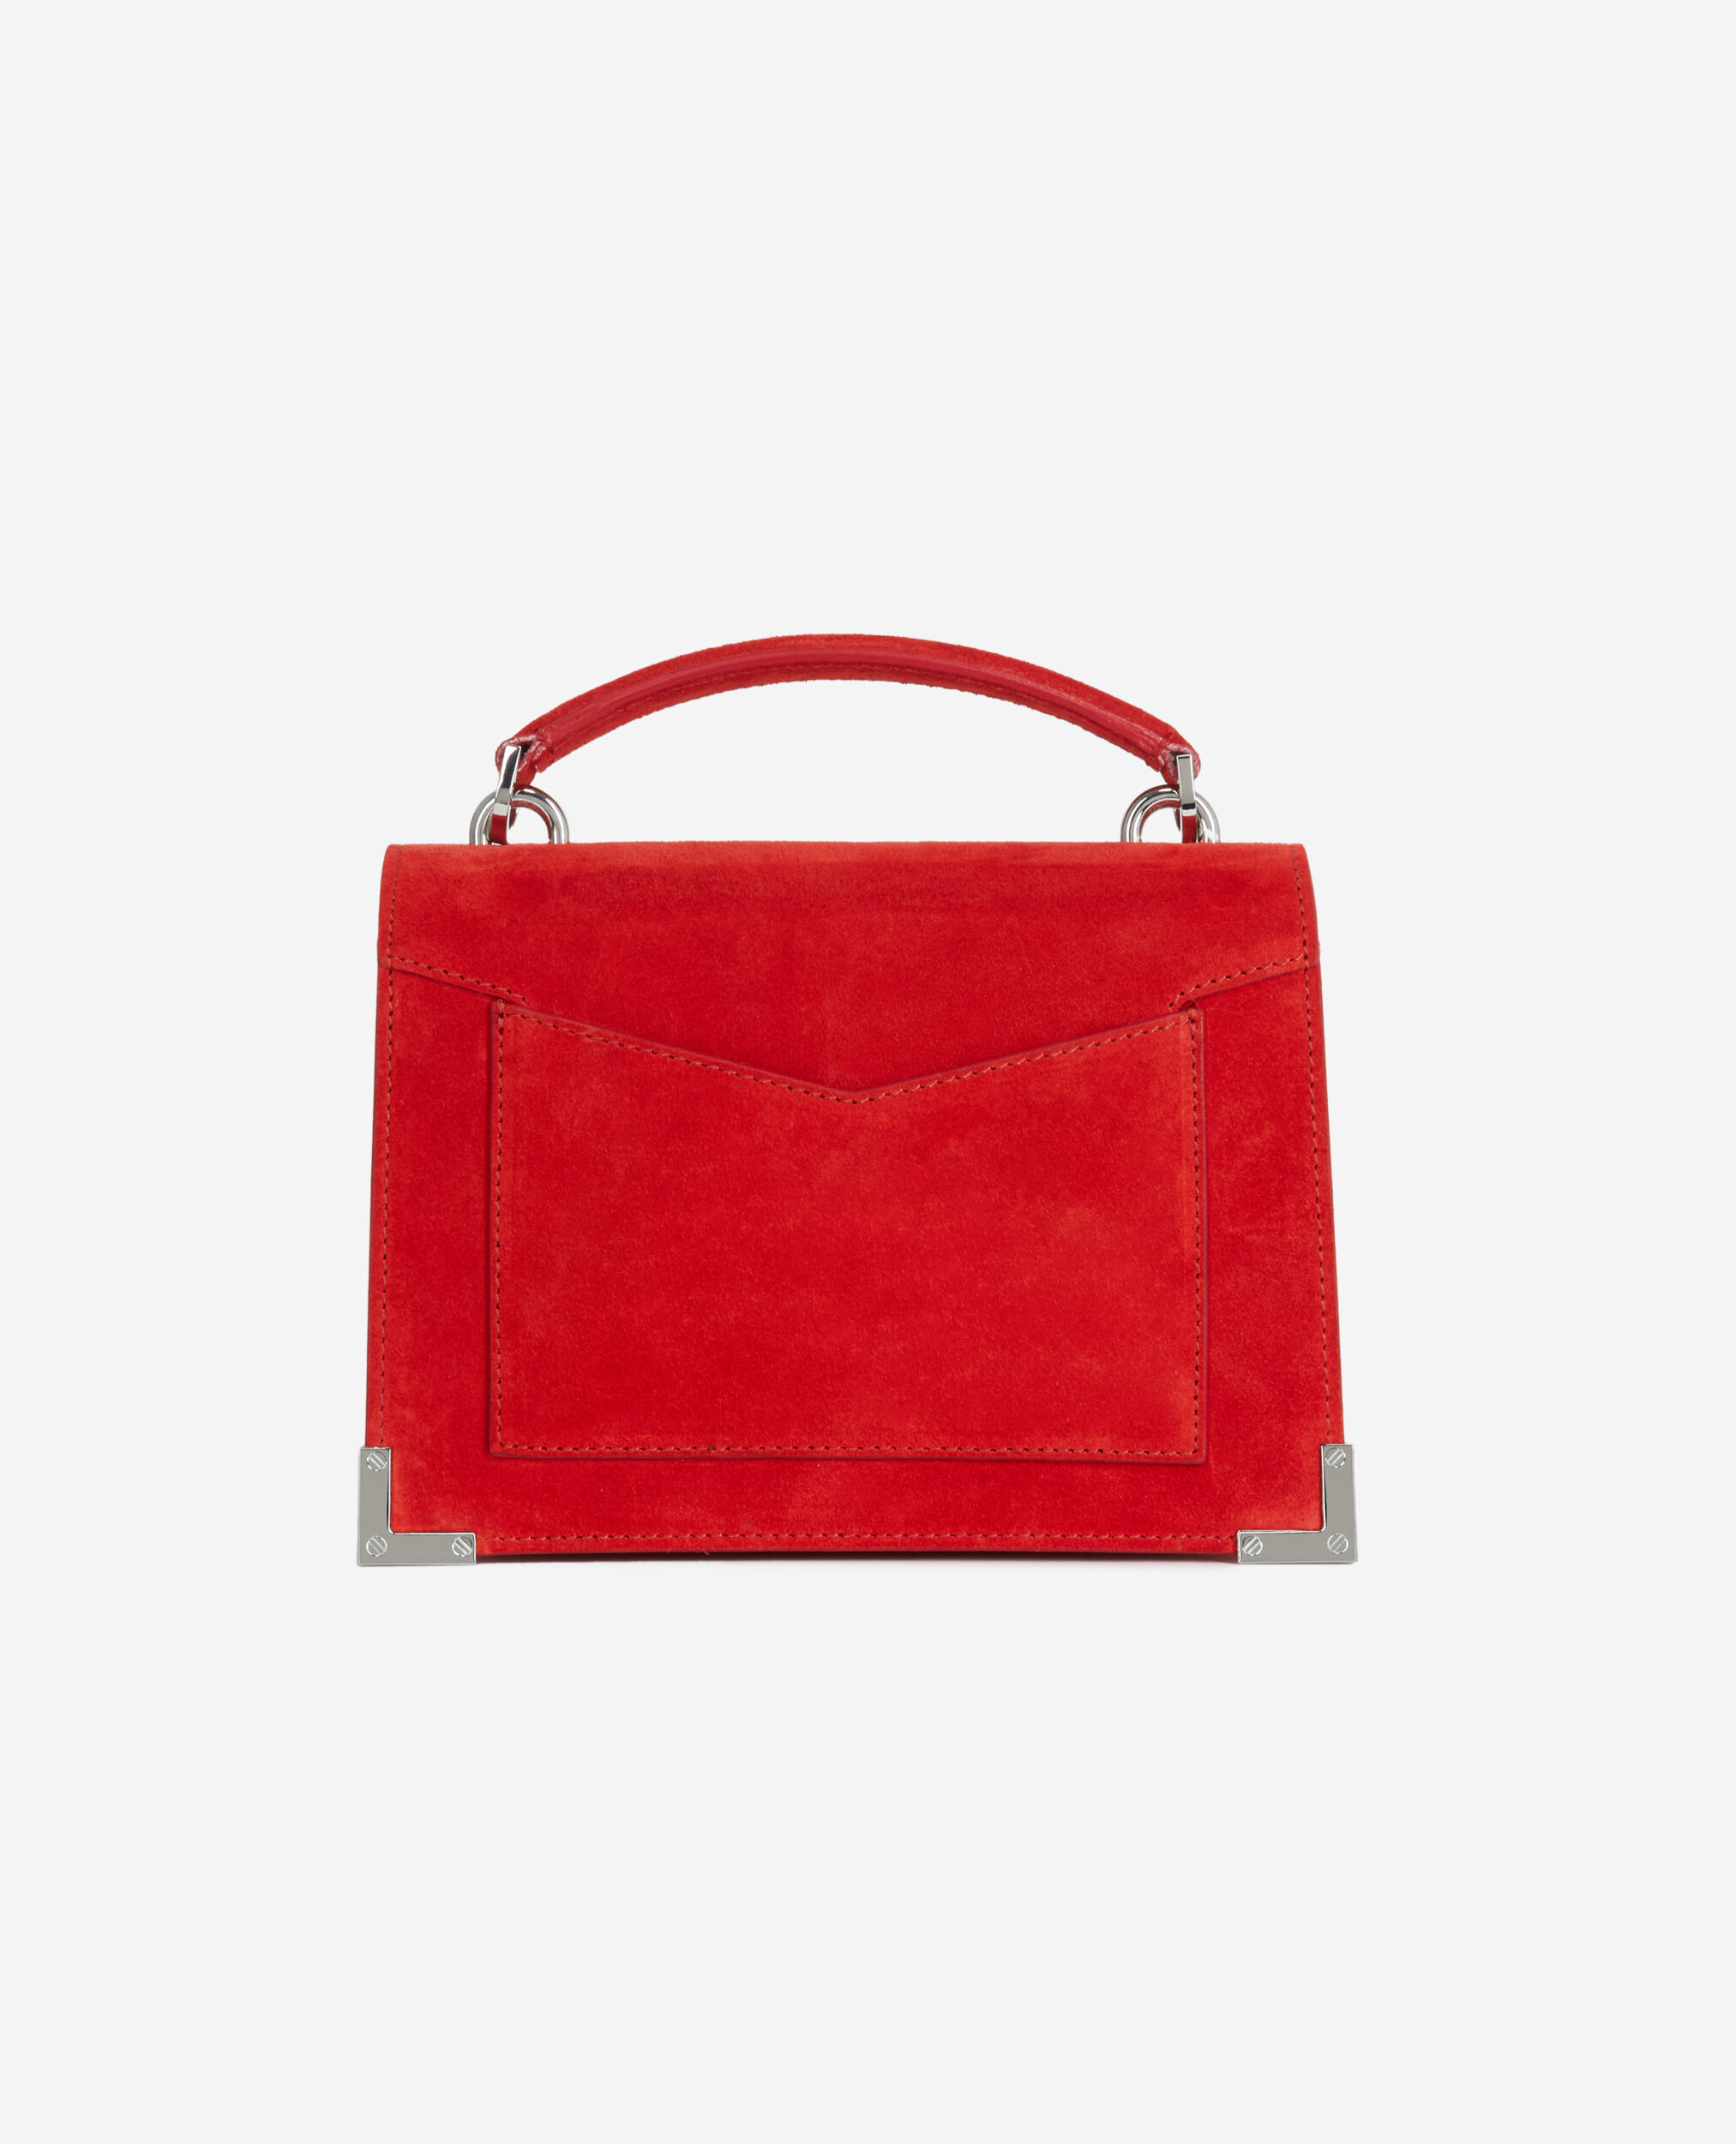 Small Emily bag in red suede leather, RED, hi-res image number null